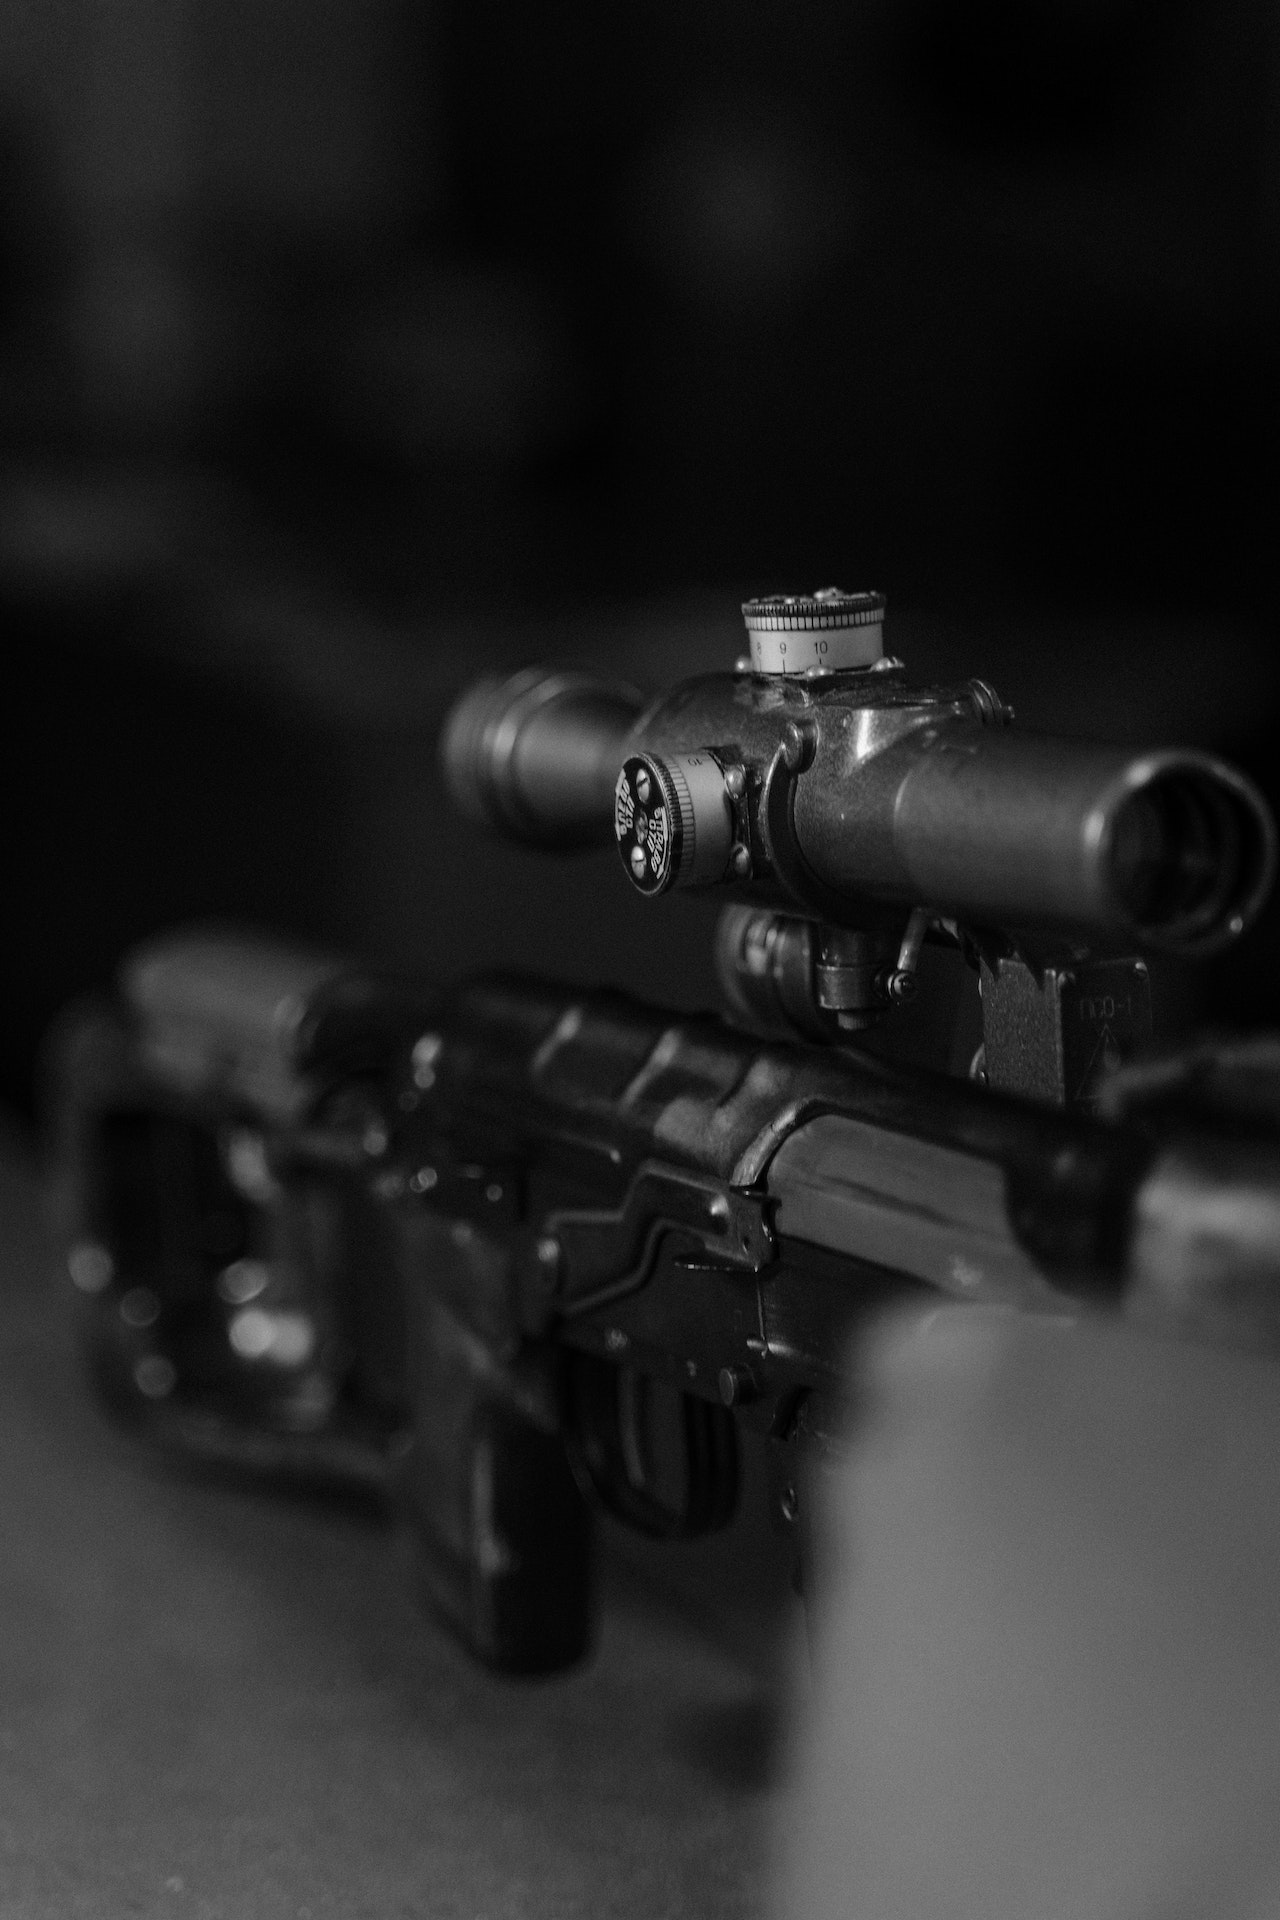 what does the magnification mean on night vision monocular